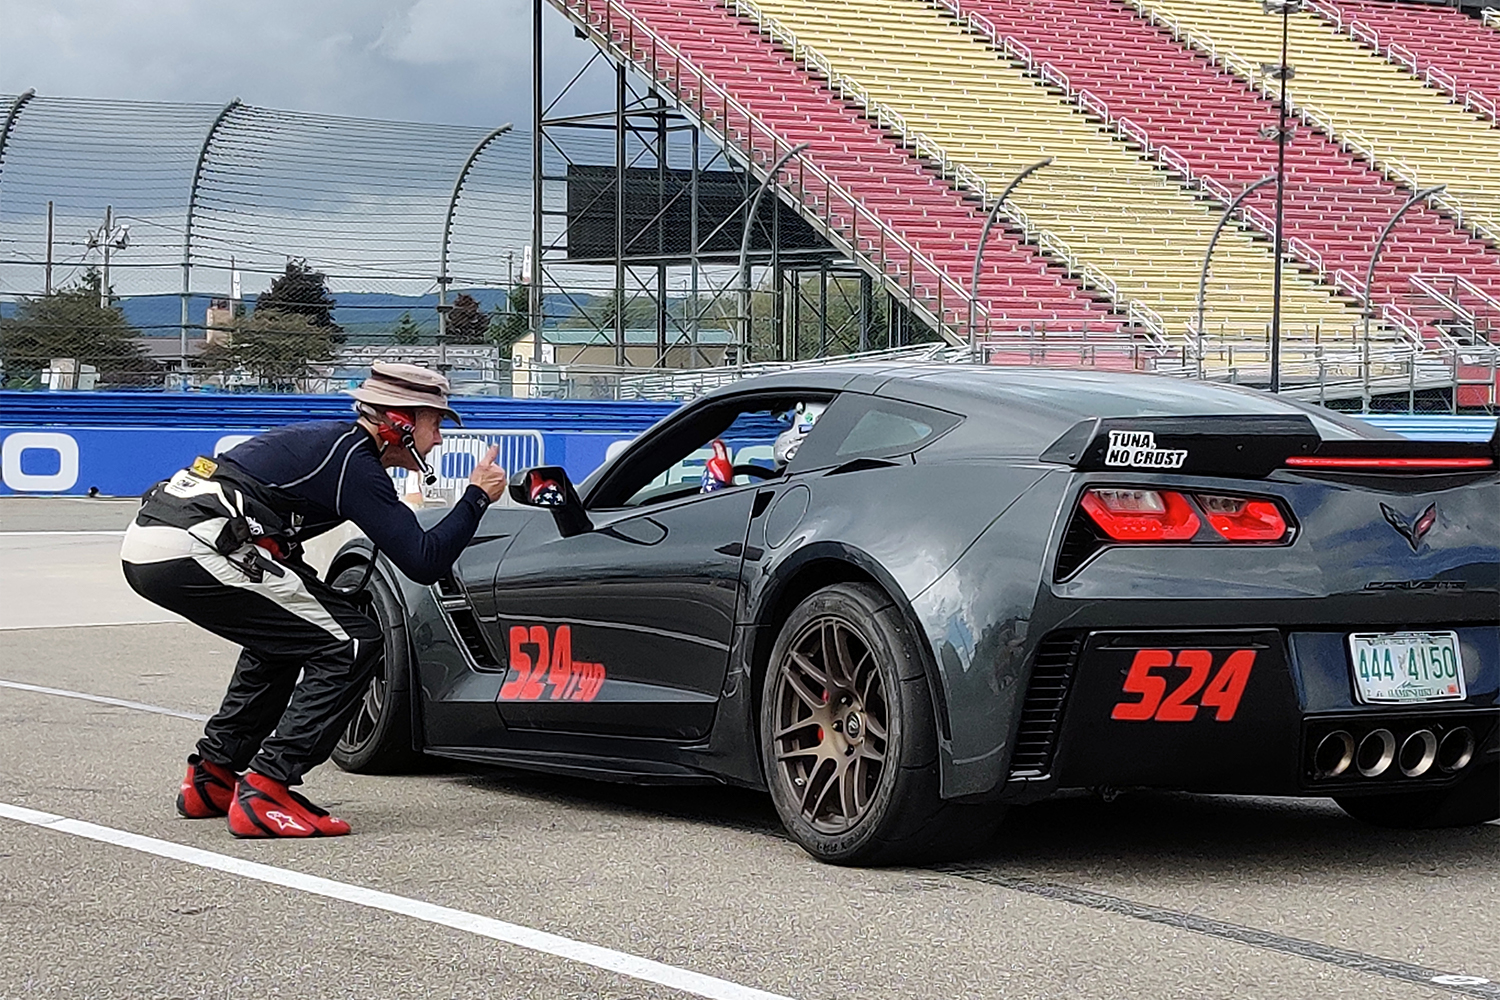 A Corvette hitting the track at Watkins Glen International racetrack with a "Tuna, No Crust" sticker alluding to the Fast and the Furious